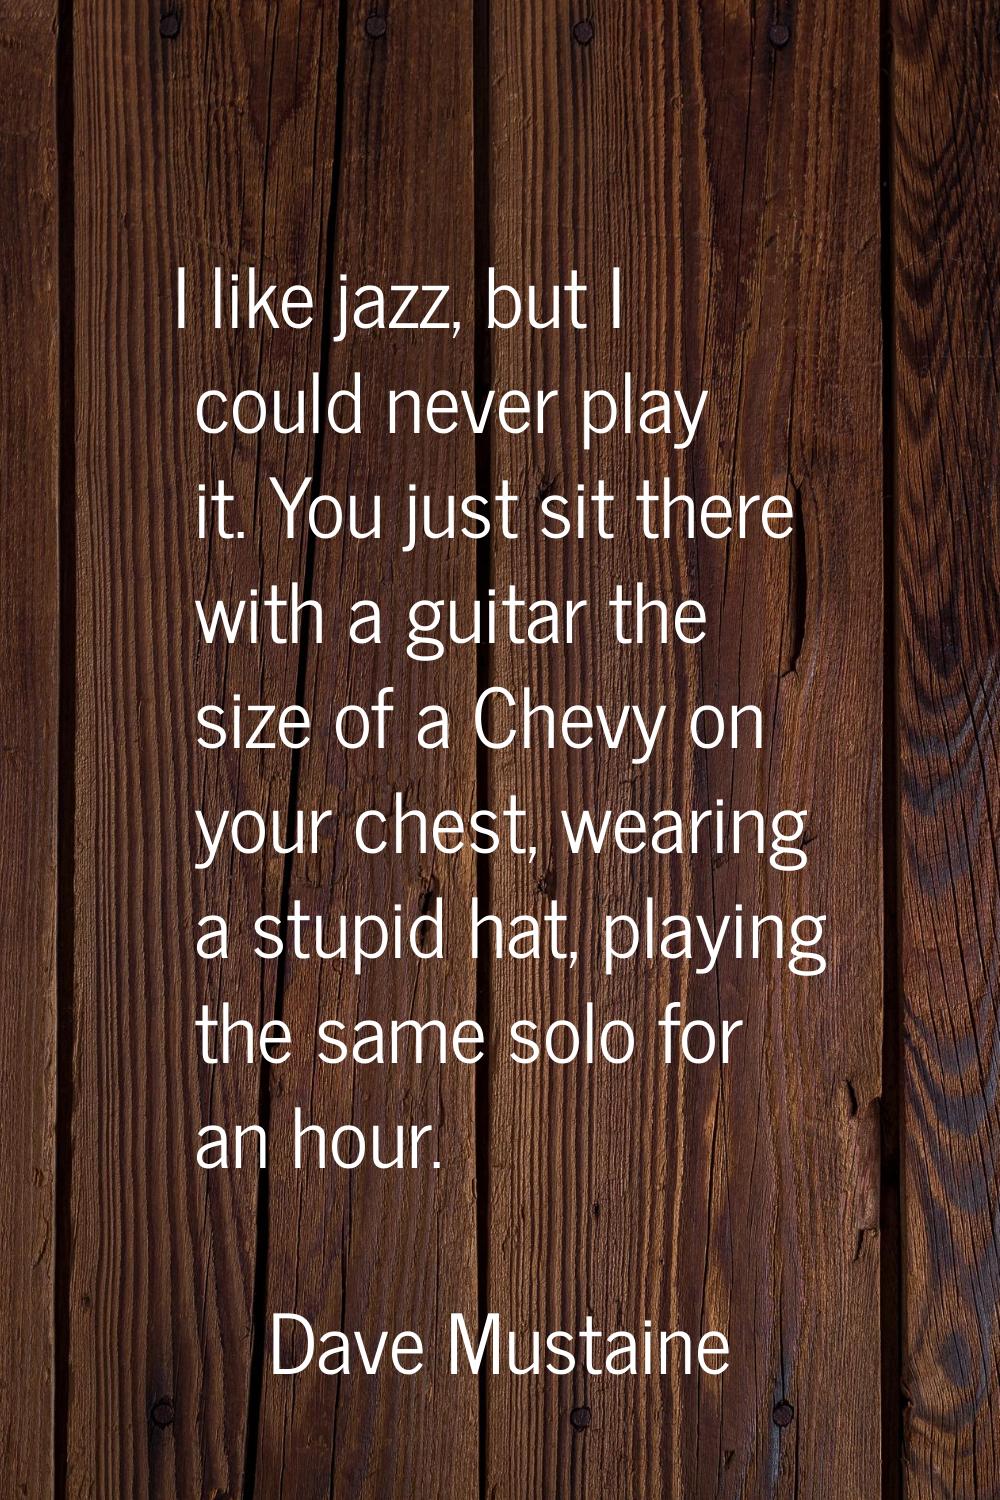 I like jazz, but I could never play it. You just sit there with a guitar the size of a Chevy on you